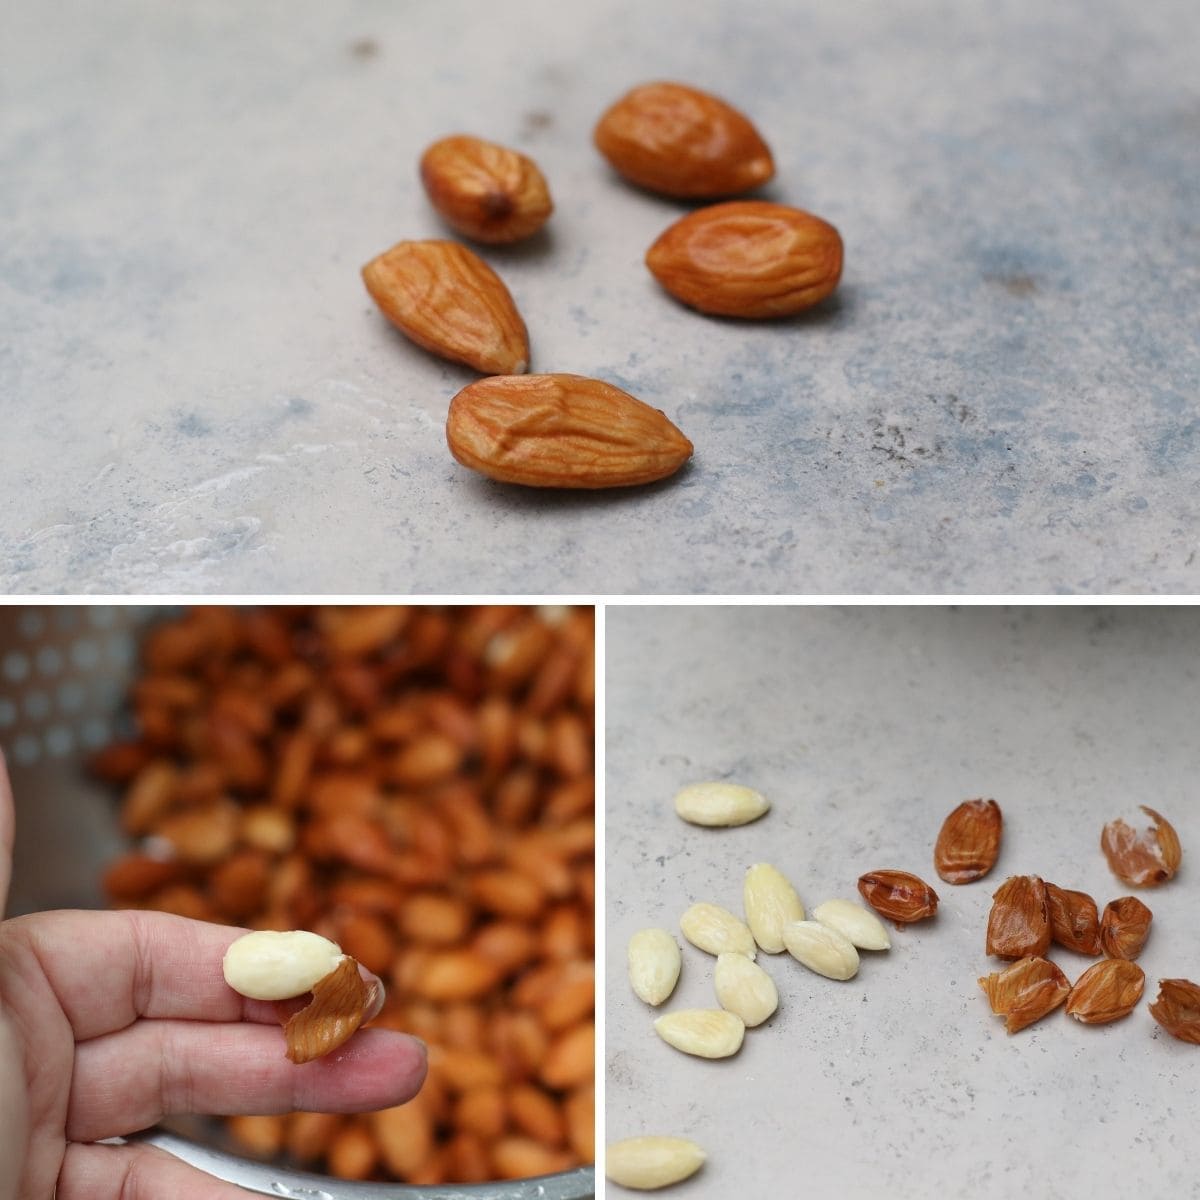 almonds with loose skin, and after skin is removed.